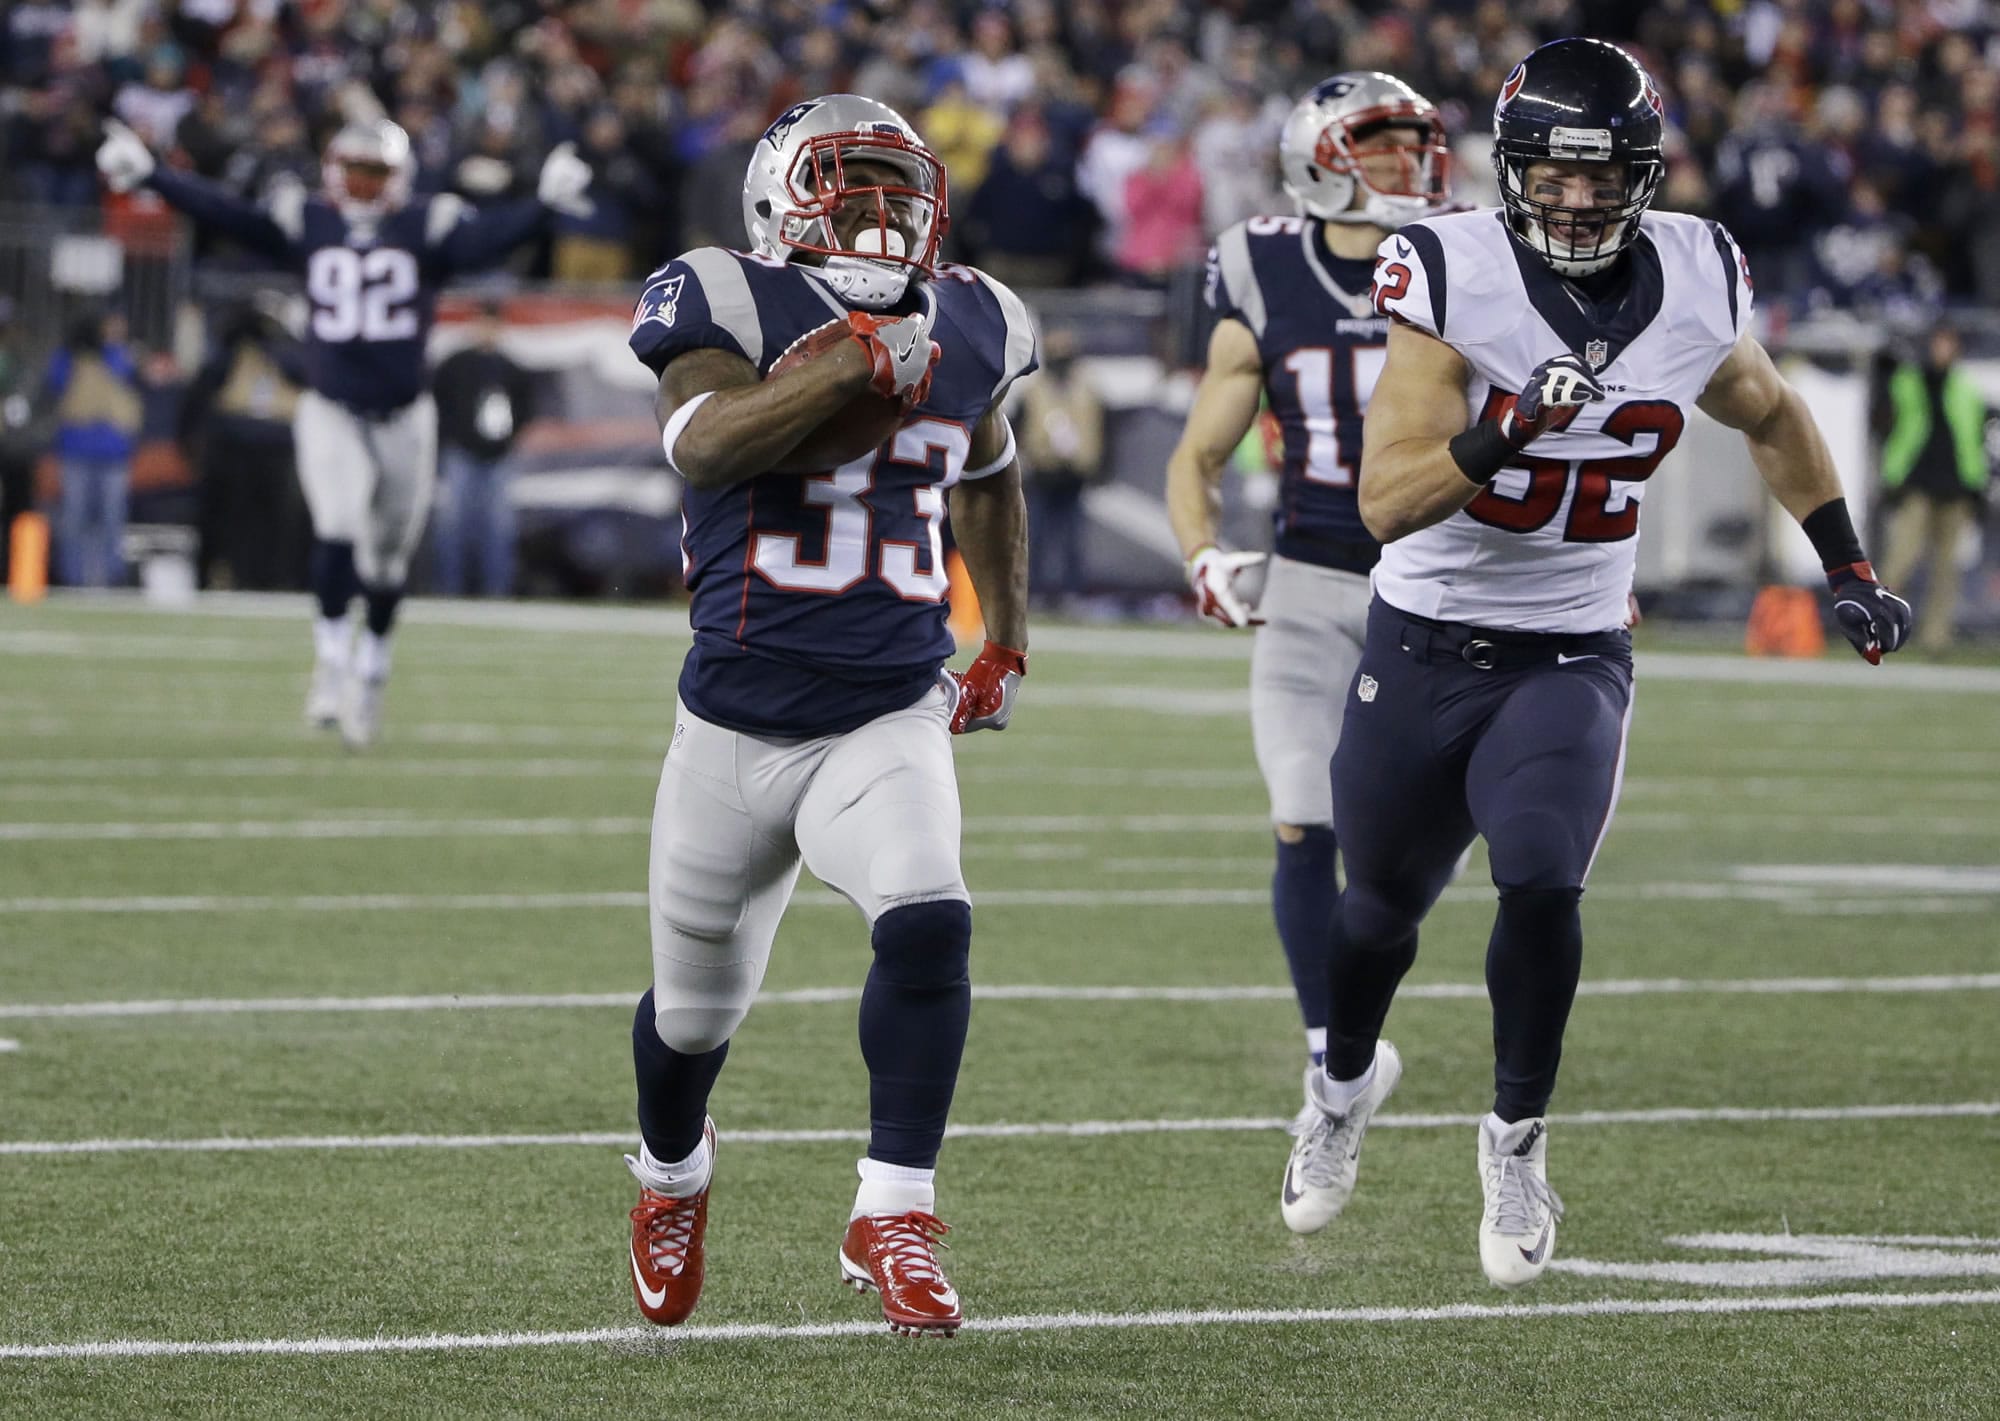 New England Patriots running back Dion Lewis (33) runs ahead of Houston Texans linebacker Brian Peters (52) for a touchdown during the first half of an NFL divisional playoff football game, Saturday, Jan. 14, 2017, in Foxborough, Mass.